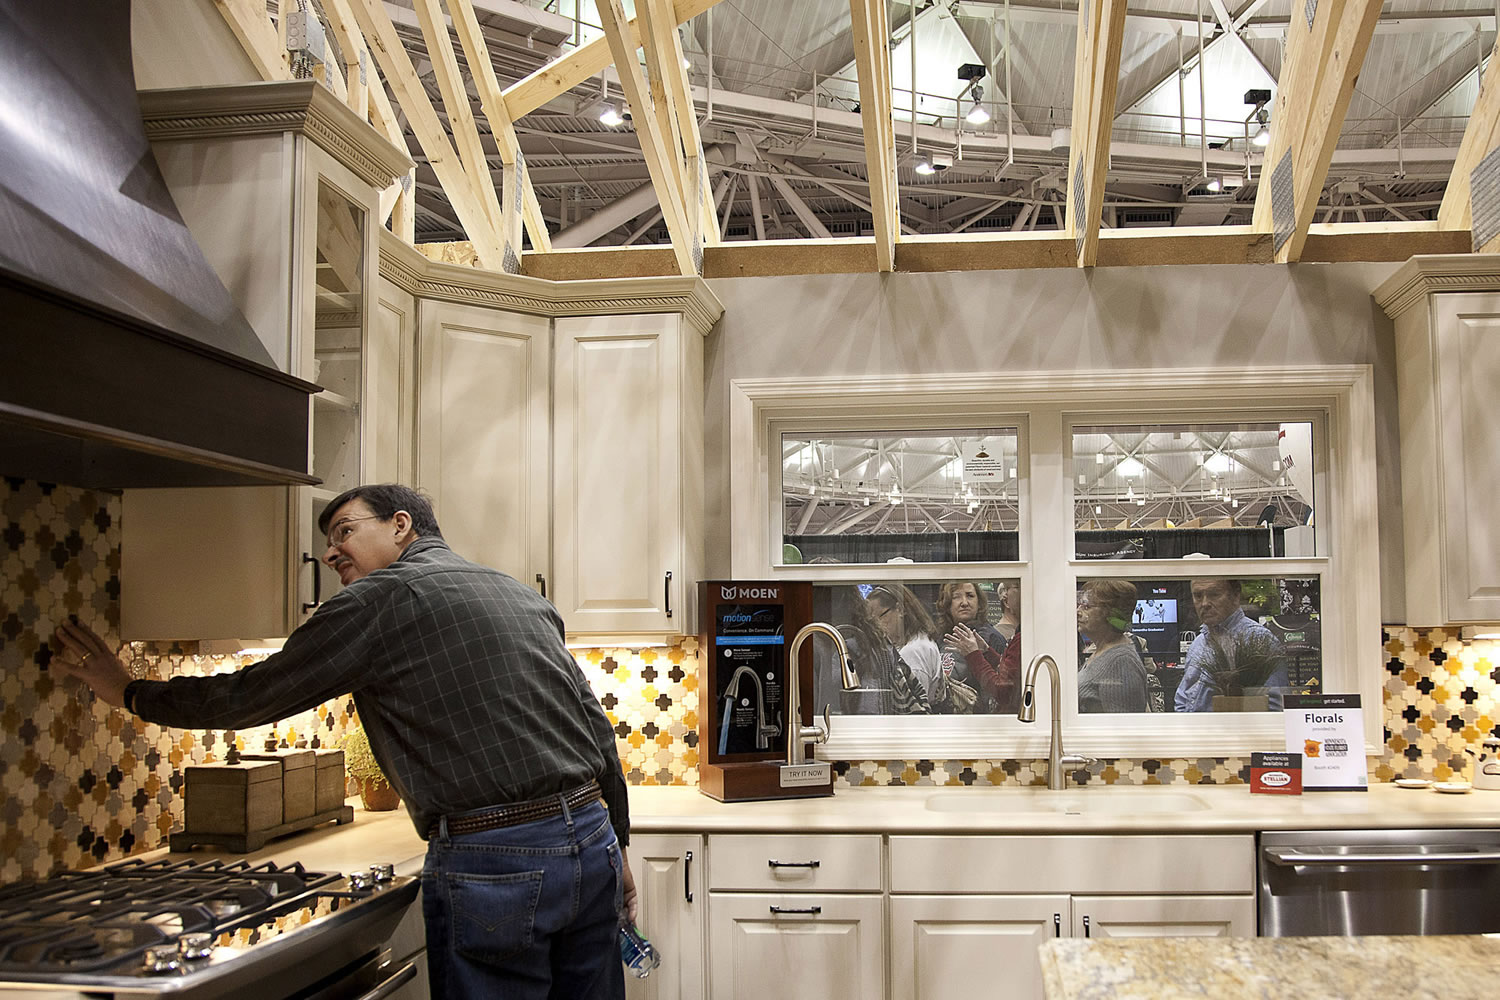 Ariana Lindquist/Bloomberg News
An attendee looks at a kitchen in an &quot;Idea Home&quot; at this month's Minneapolis Home &amp; Garden Show. Homeowners who did only must-do repairs or minor upgrades during the recent housing downturn are again starting wish-list projects as home prices rise.